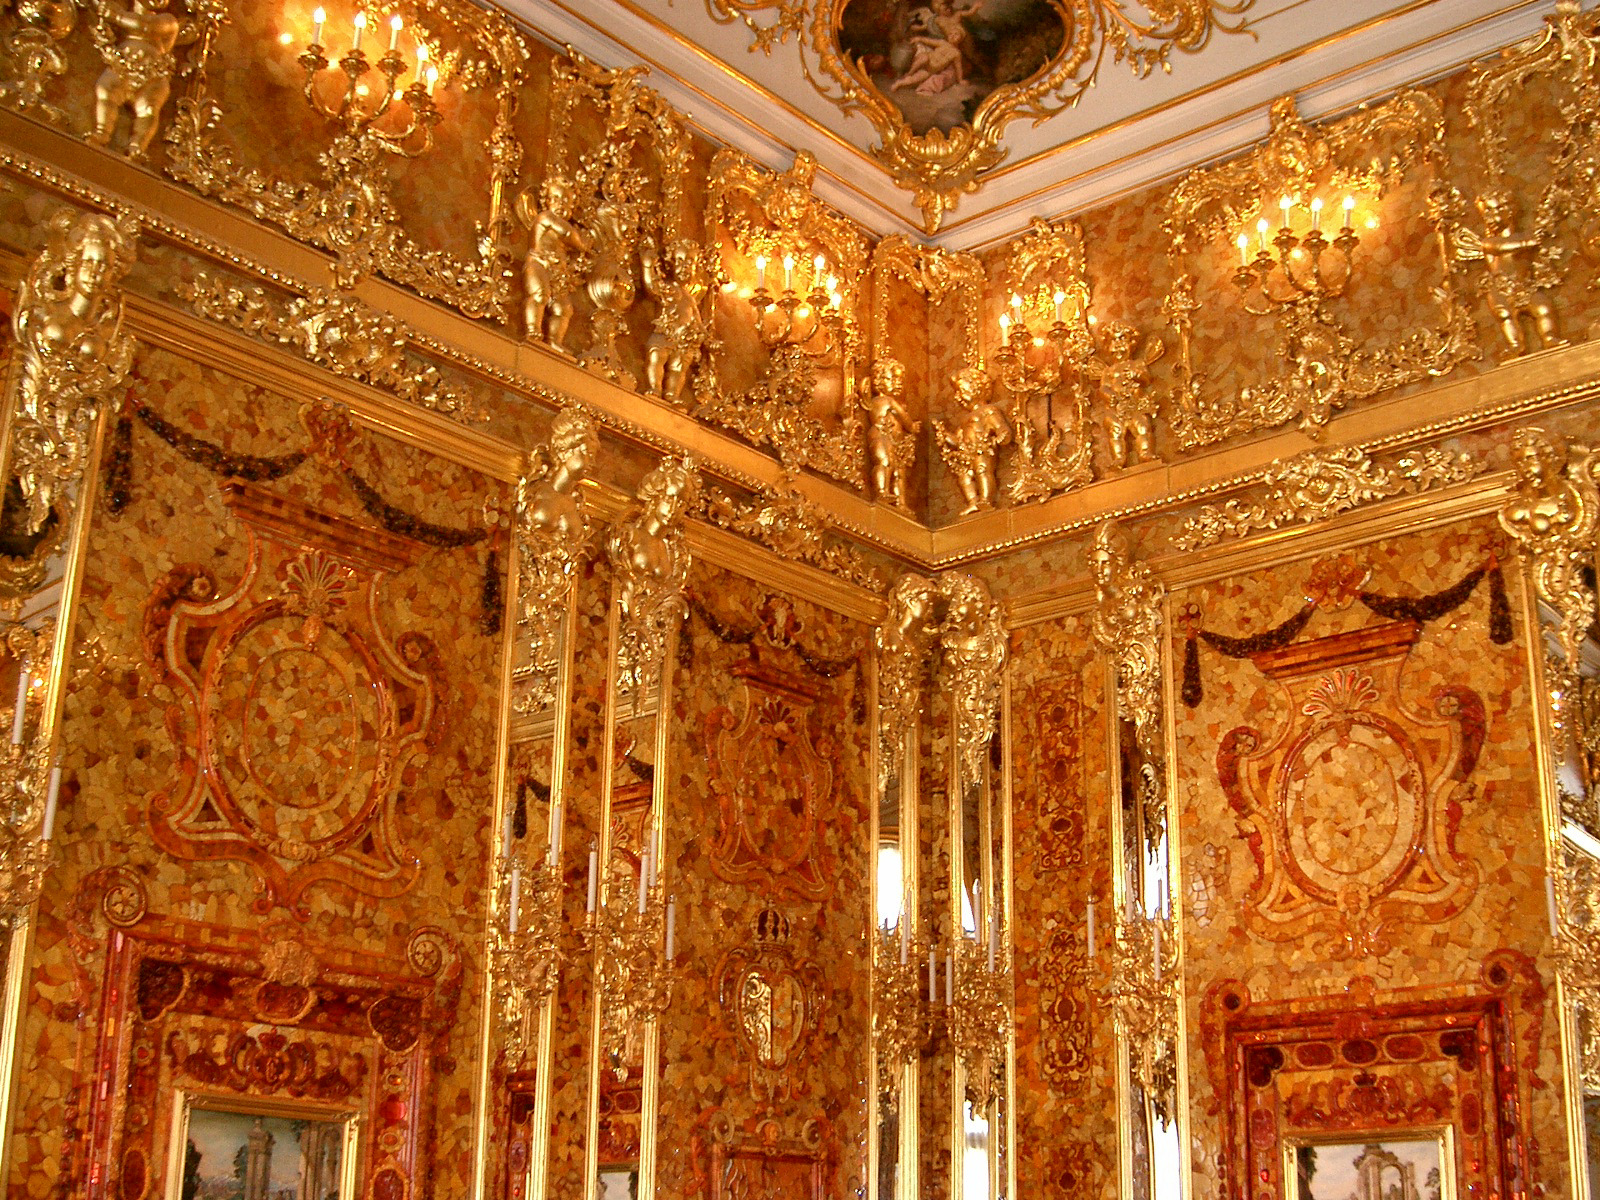 Copy of Interior shot of the Amber Room, by Wikimedia Commons user jeanyfan - Own work, Public Domain